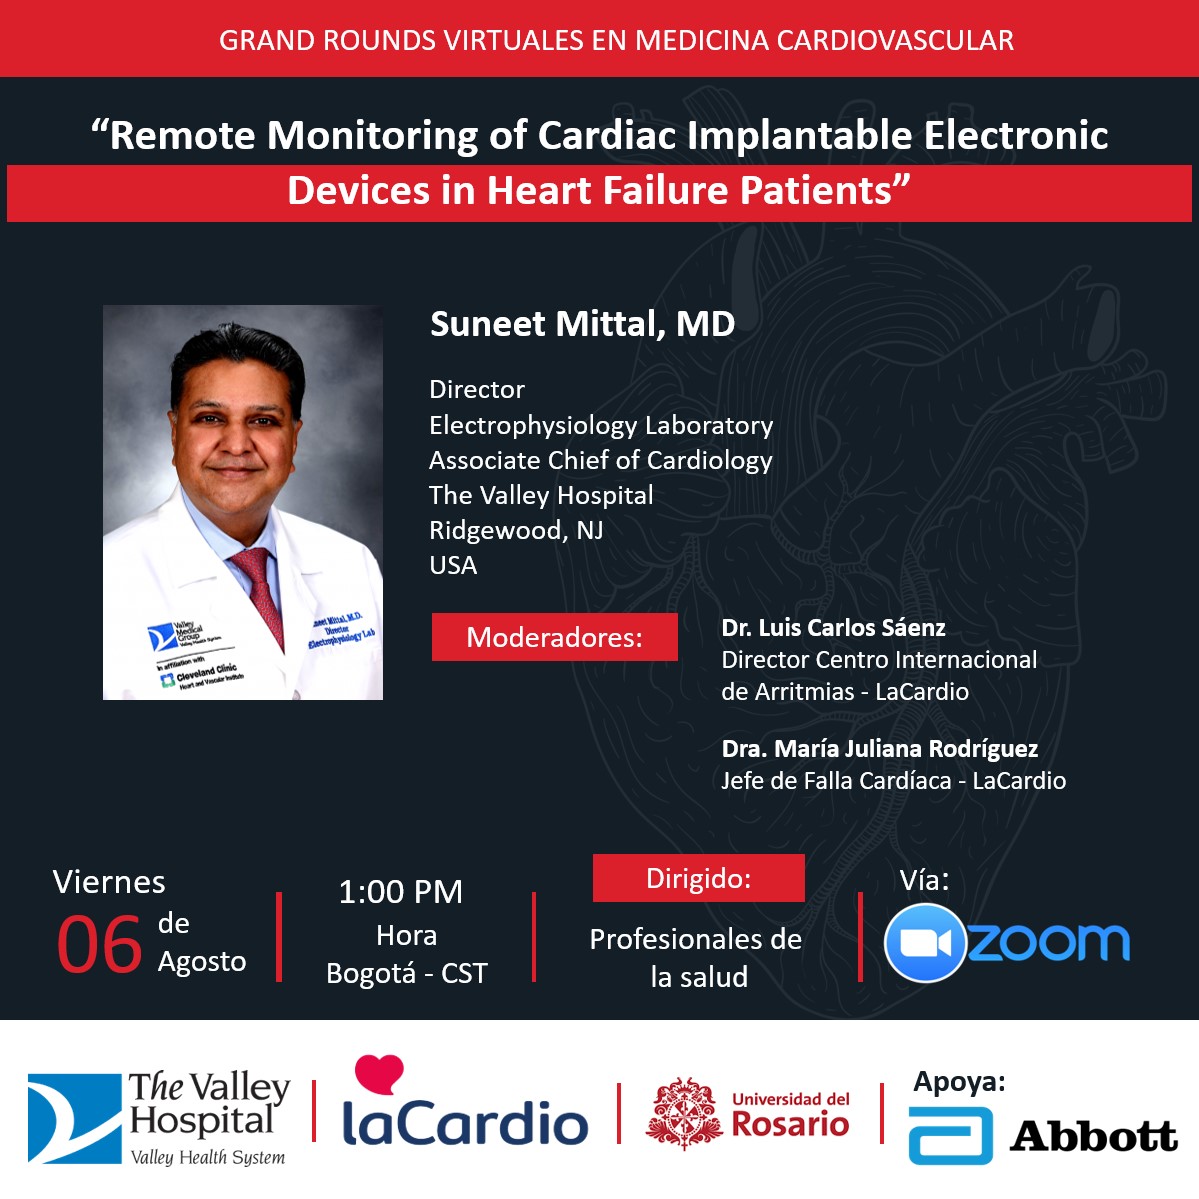 Grand Rounds en Medicina Cardiovascular: Remote Monitoring of Cardiac Implantable Electronic Devices in Heart Failure Patients